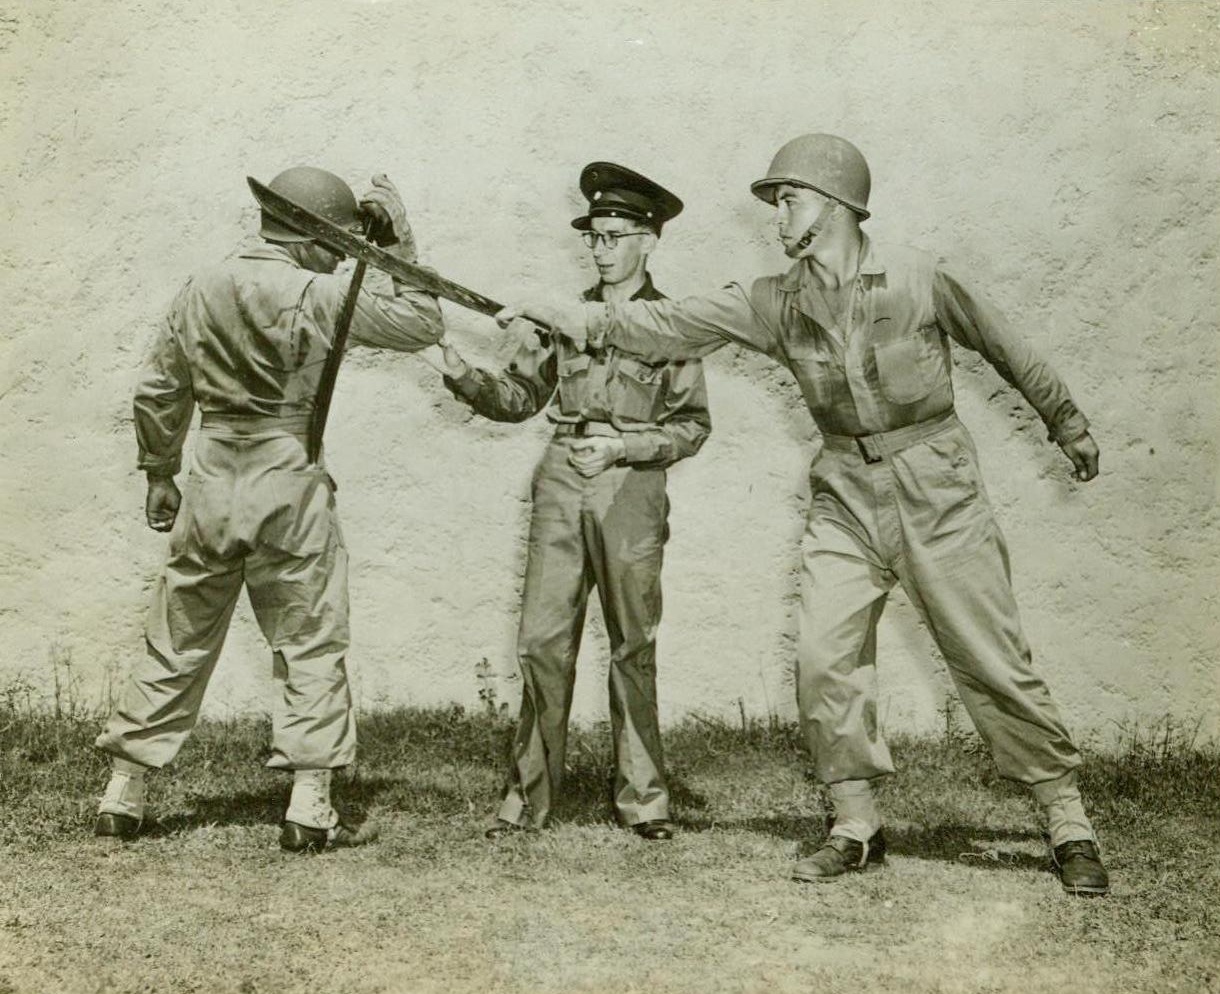 U.S. SOLDIERS LEARN JUNGLE FIGHTING, 8/5/1942. In this photo released by the U.S. Army Signal Corps, a Panamanian officer (center) instructs two American soldiers in the correct method of parrying a slashing stroke of a machete. This type of fighting is very important in jungle warfare. Credit: U.S. Army Signal Corps photo from ACME;